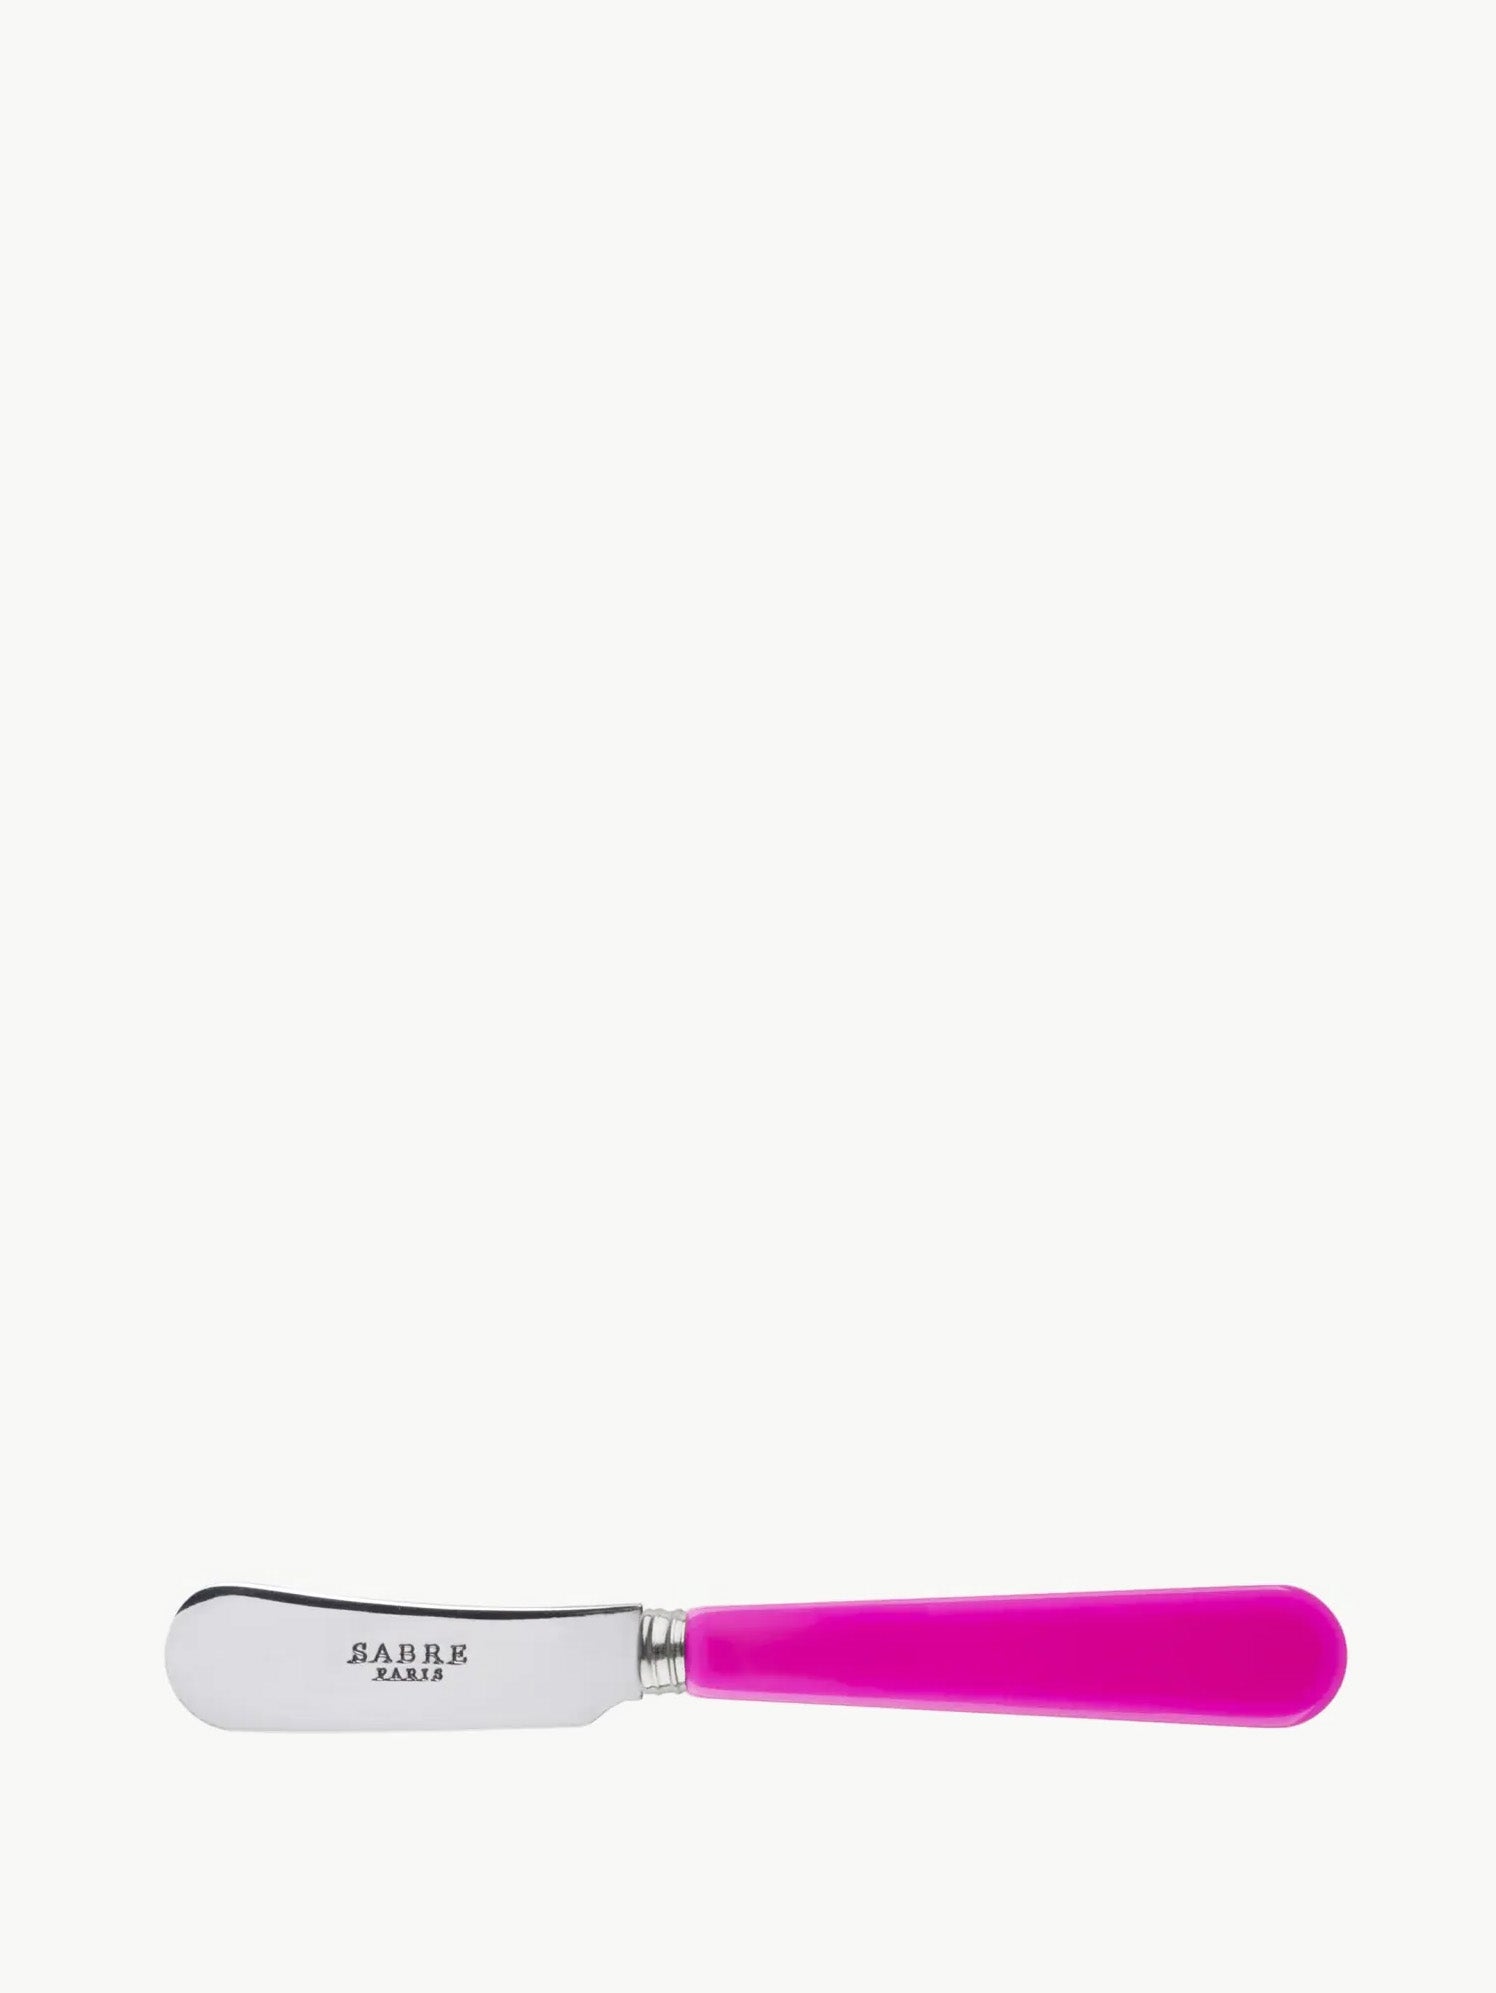 Duo butter knife, pink